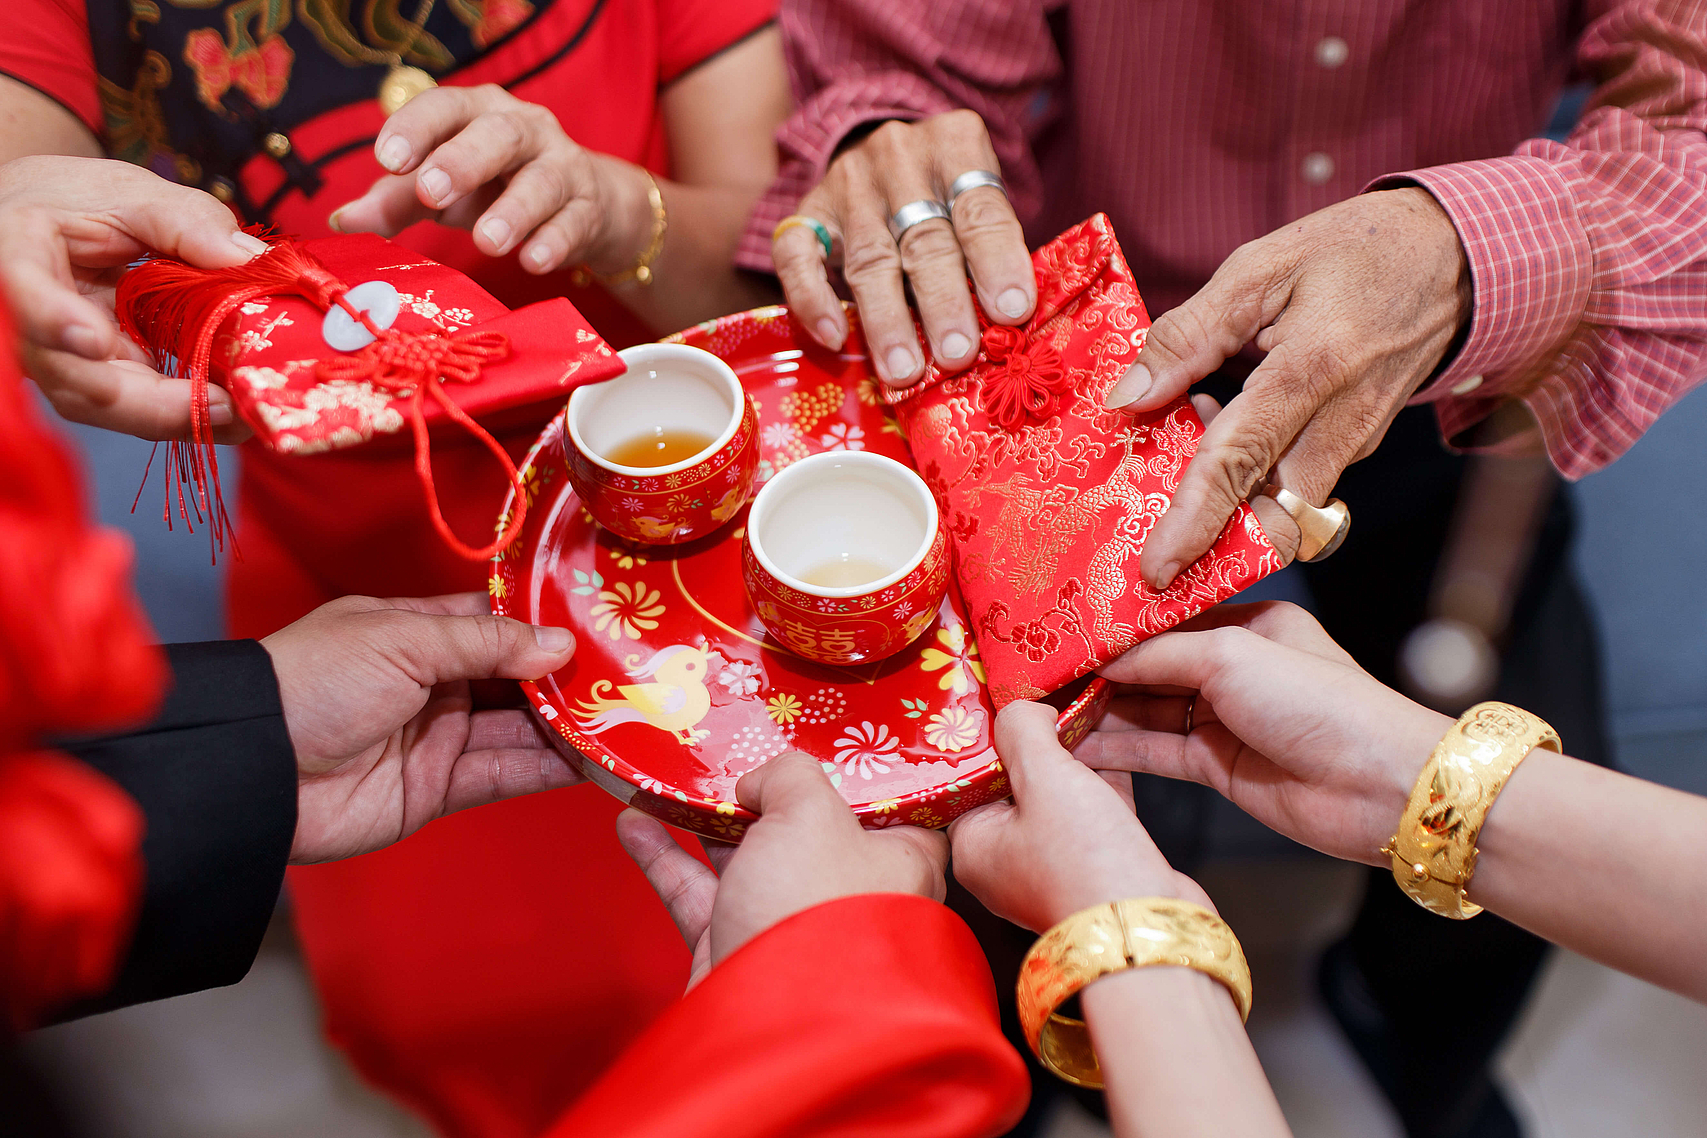 The Tradition of Giving Red Envelopes or Red Envelopes Filled with